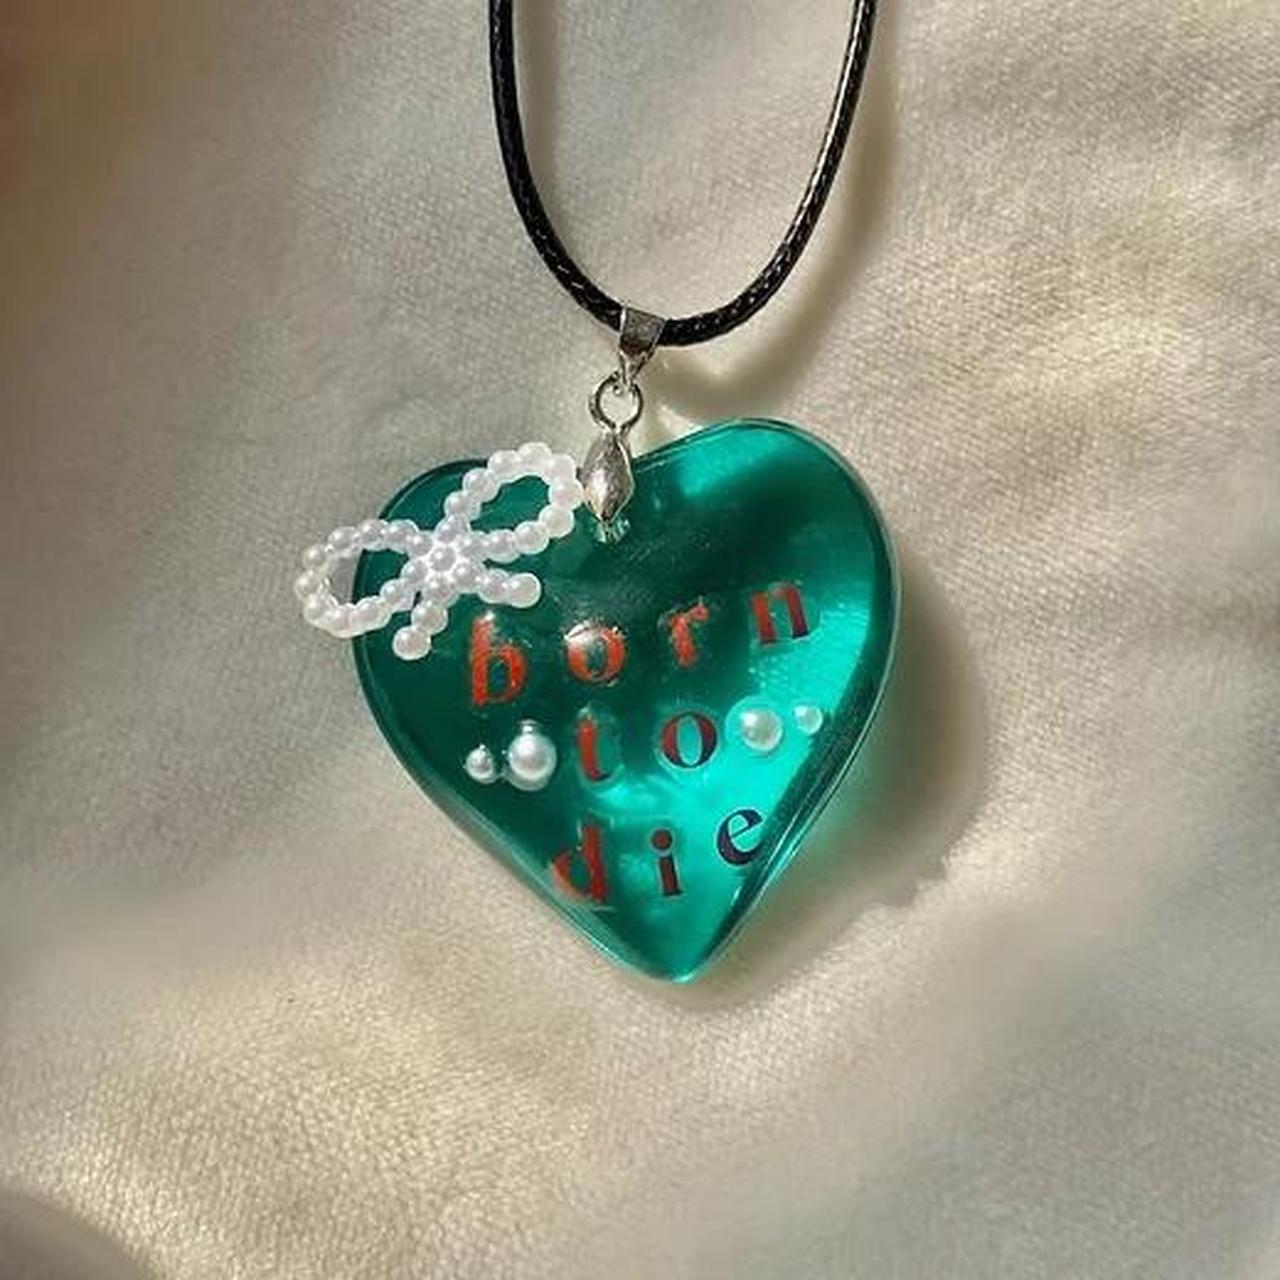 3D Printed LDR Heart Necklace – Underdog Trading Co.